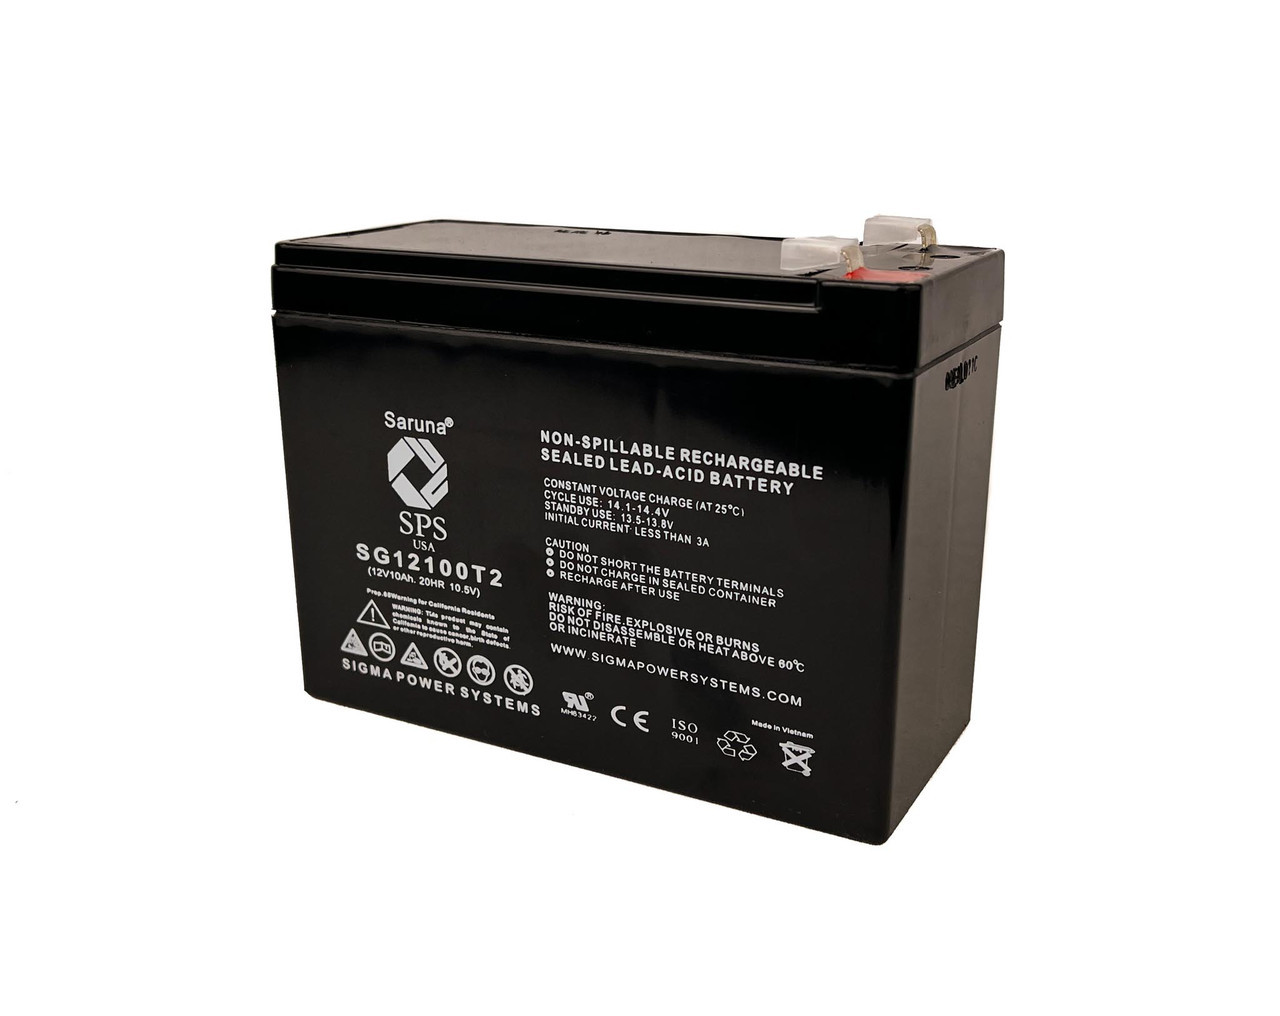 Raion Power 12V 10Ah Non-Spillable Replacement Rechargebale Battery for Gruber Power 58AGPS-12-10-F2